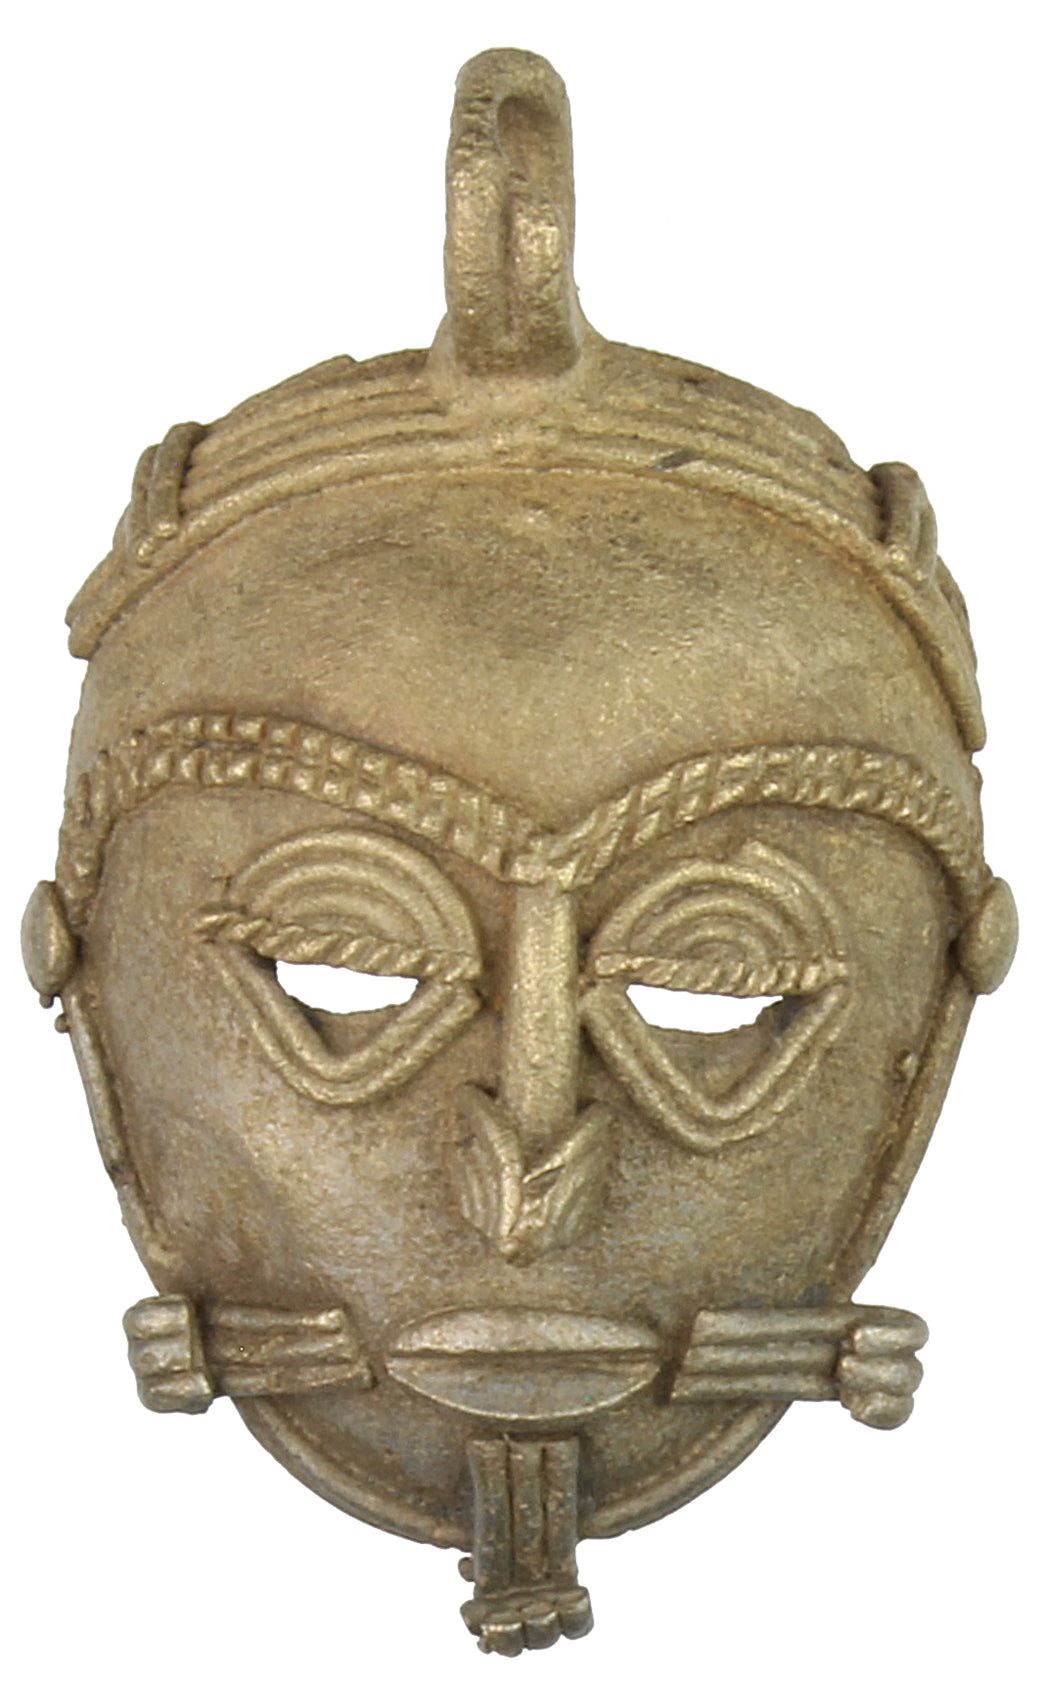 Contemporary African Brass Mask - Niger Bend